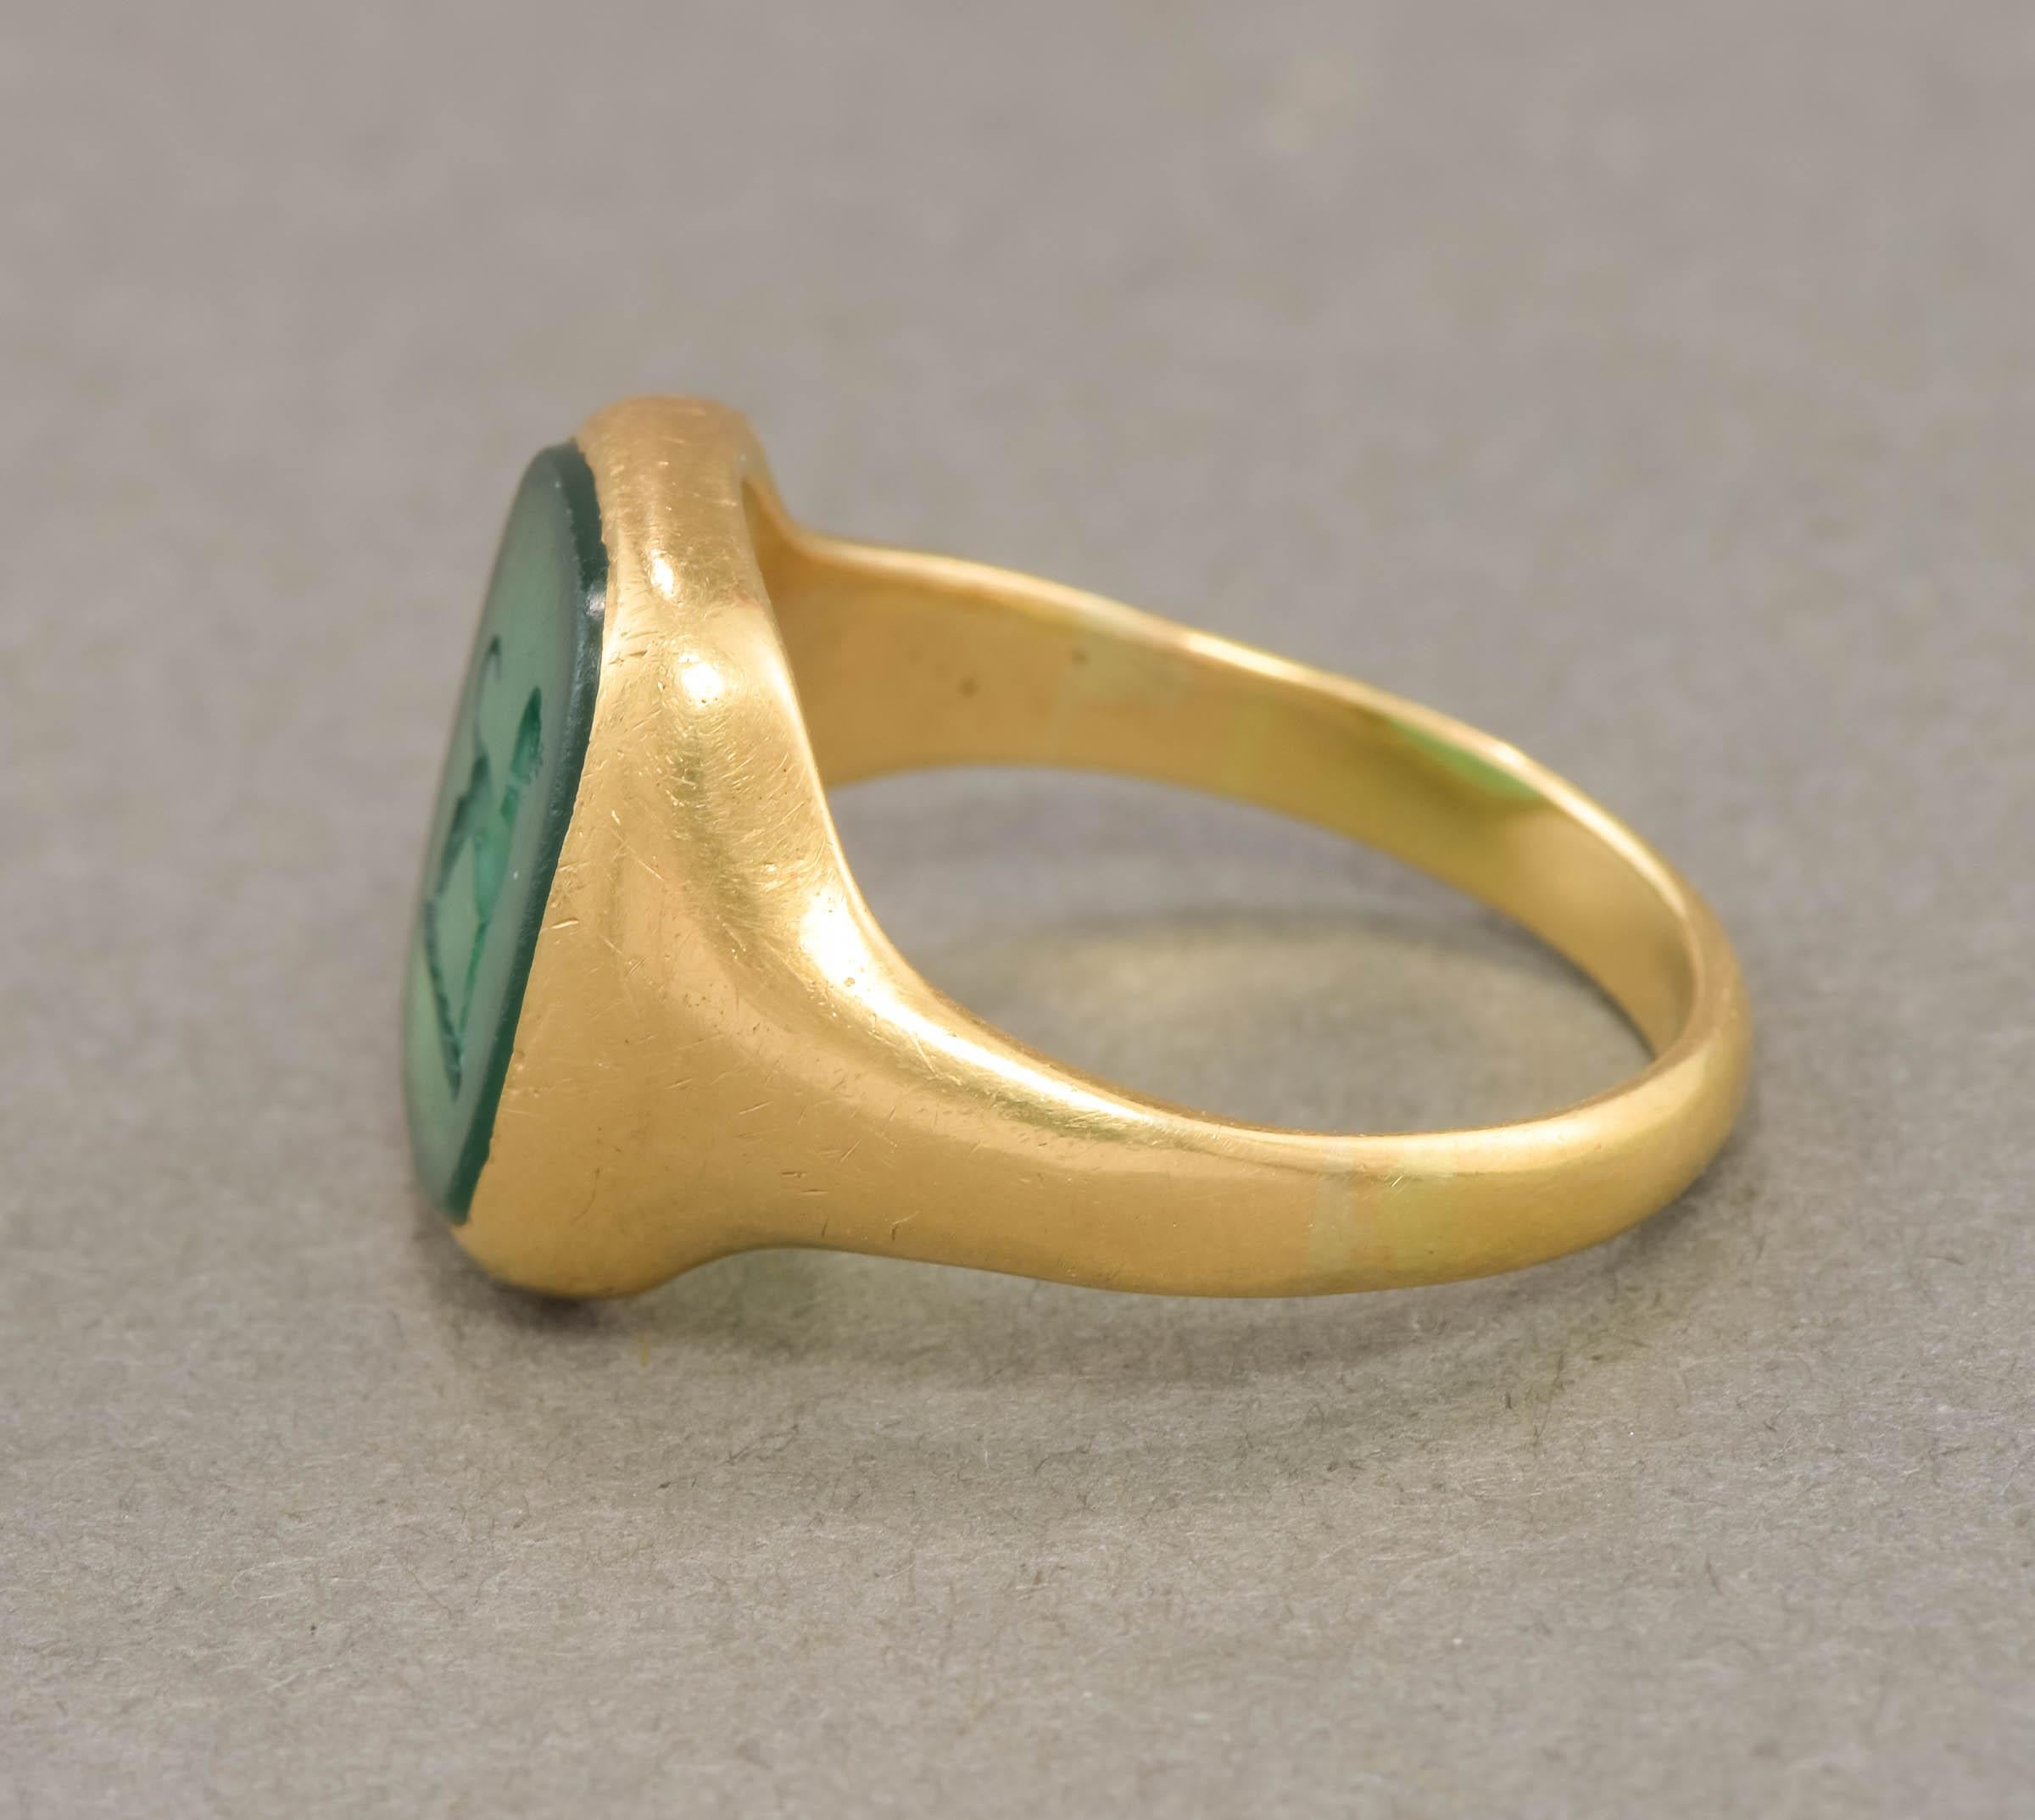 Antique 18K Gold Intaglio Dog Ring in Green Chalcedony 4